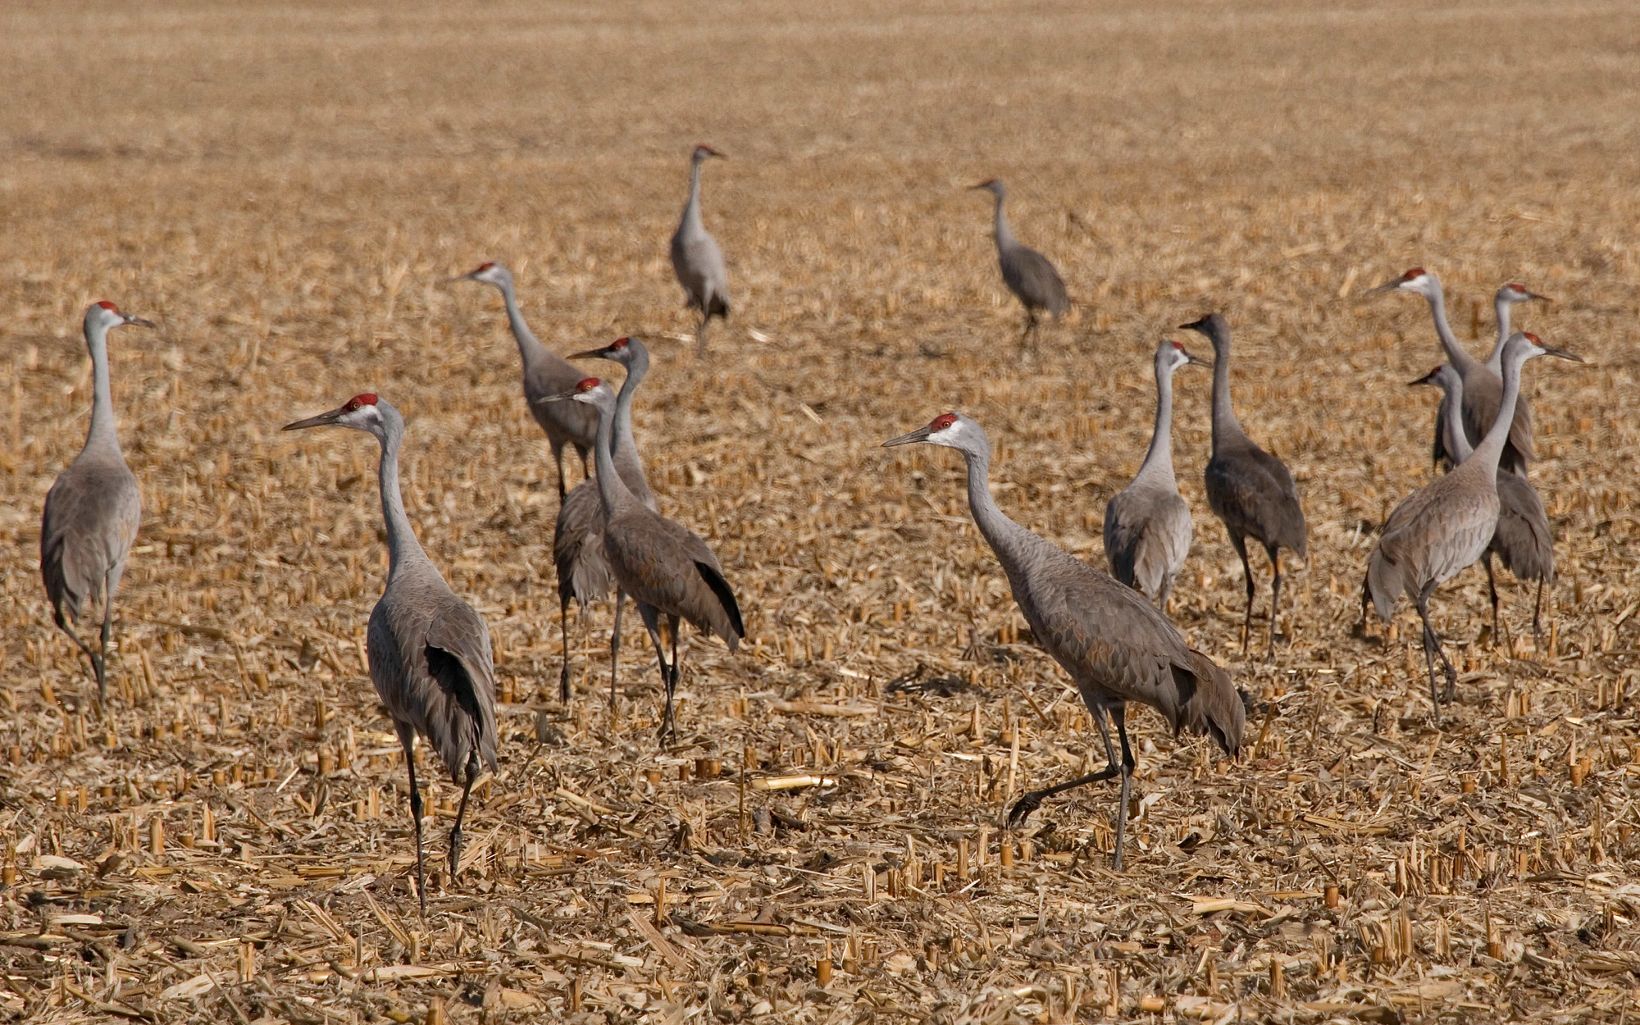 Sandhill cranes in a corn field during their annual migration stop along the Platte River in south central Nebraska. © Chris Helzer/The Nature Conservancy